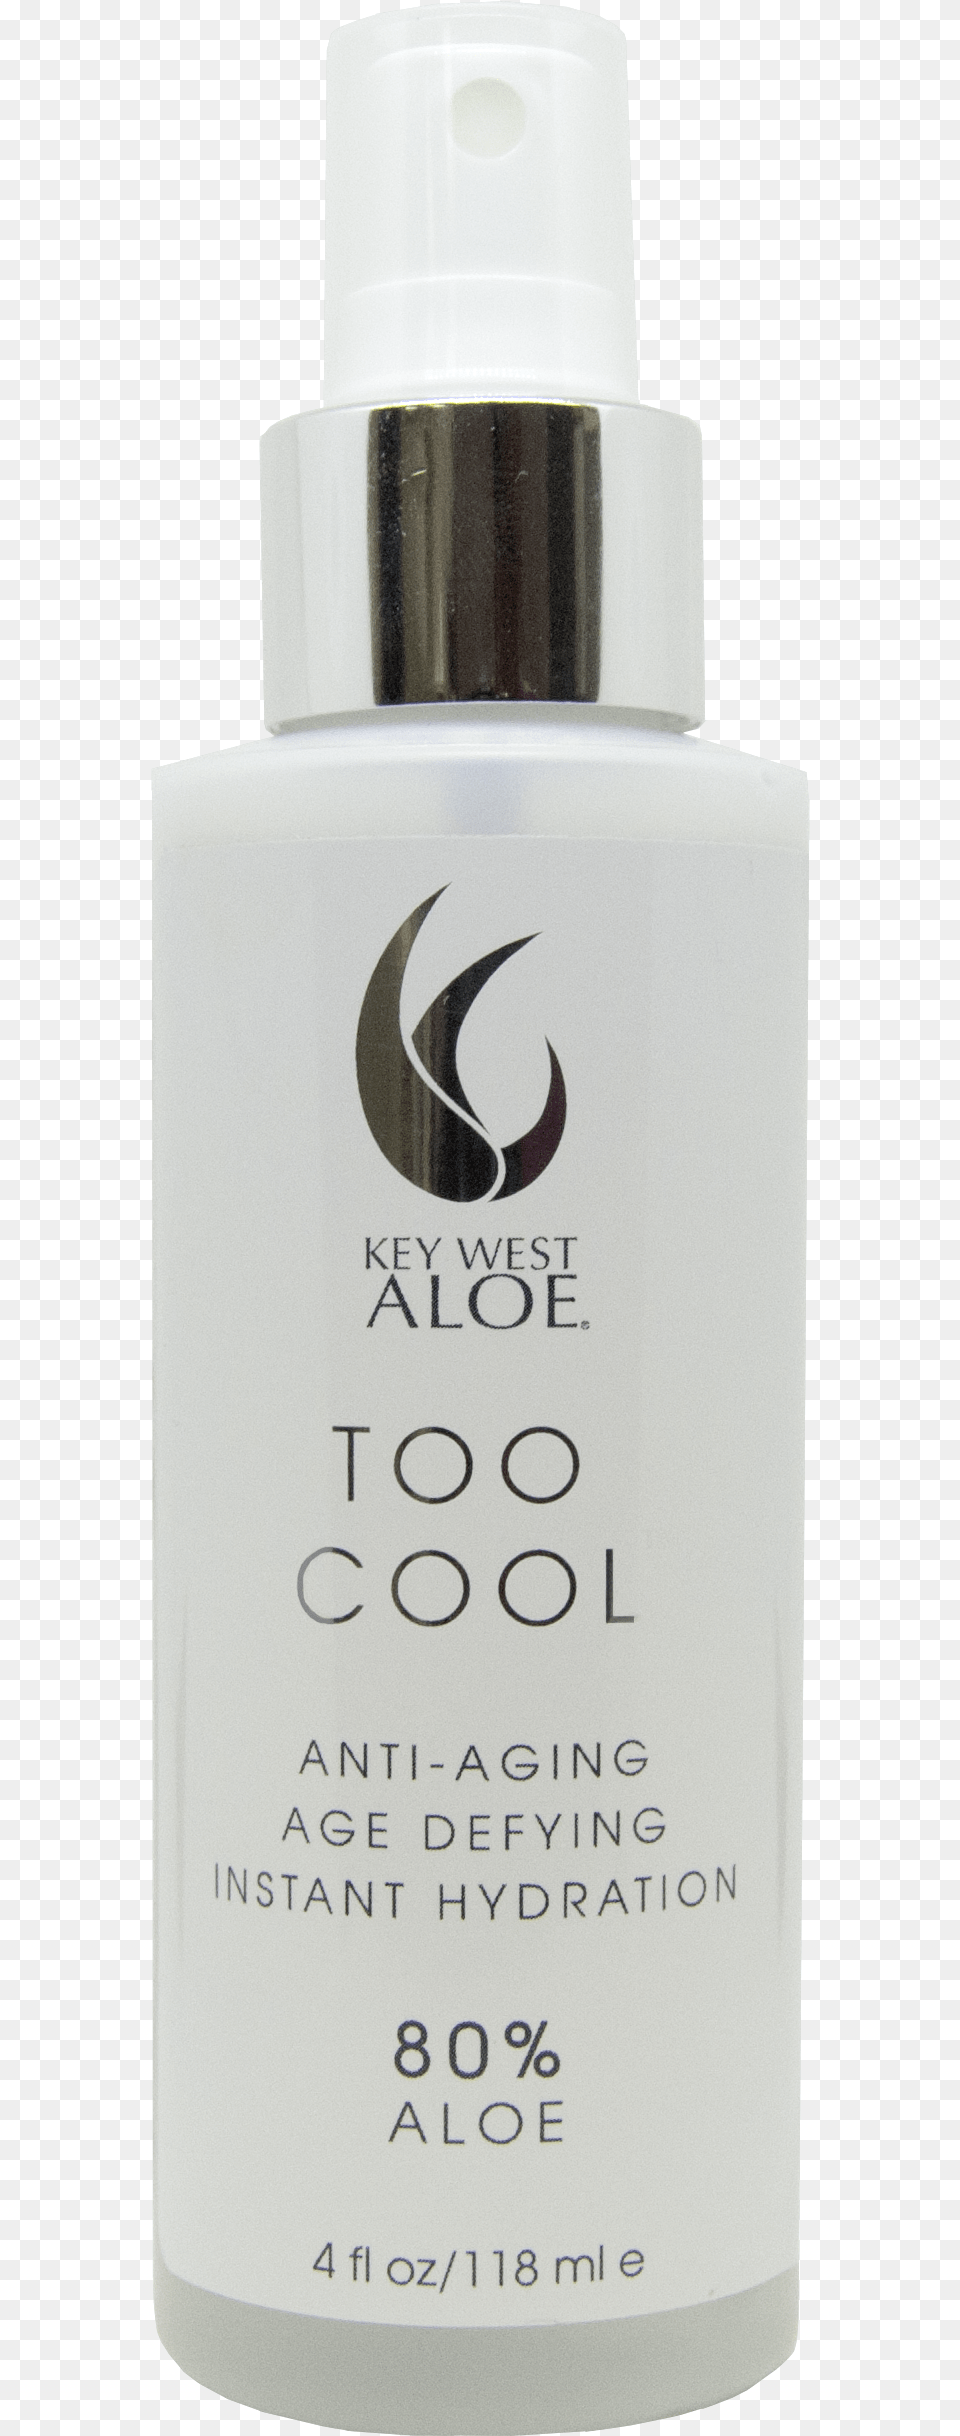 Too Cool From Key West Aloe Cosmetics, Bottle, Perfume Png